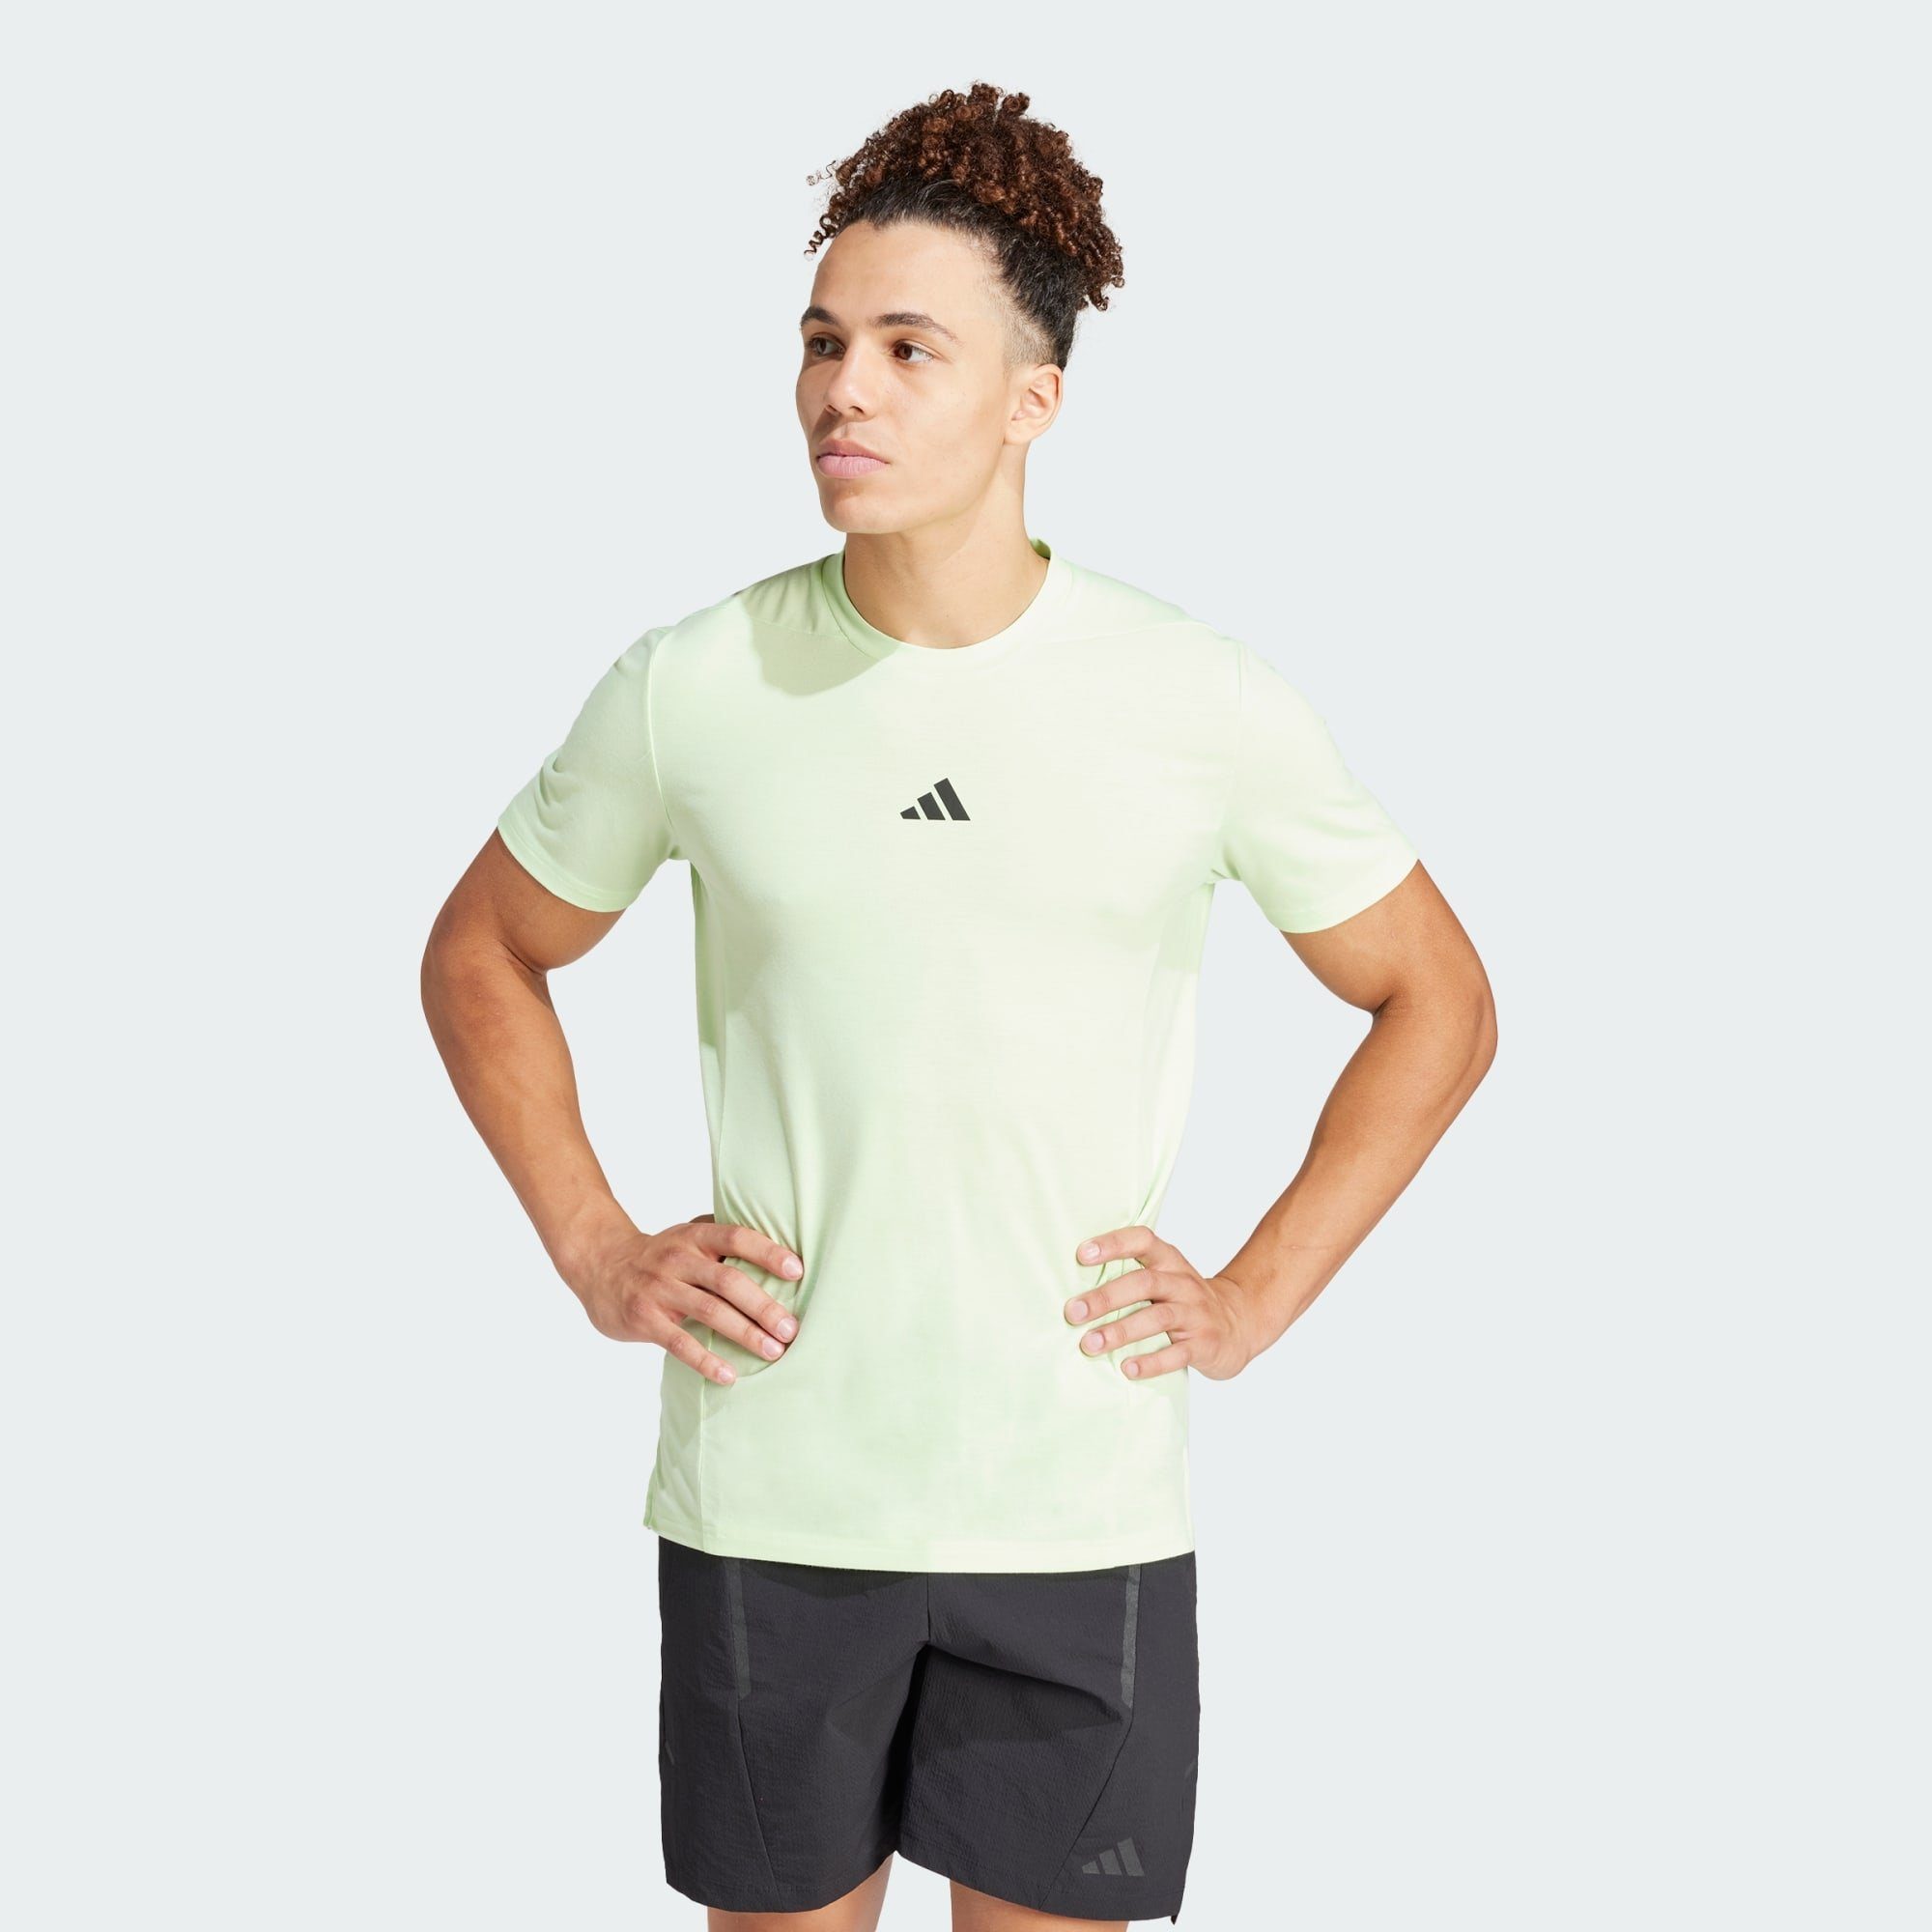 Spark FOR TRAINING Funktionsshirt Performance DESIGNED WORKOUT T-SHIRT Green Semi adidas